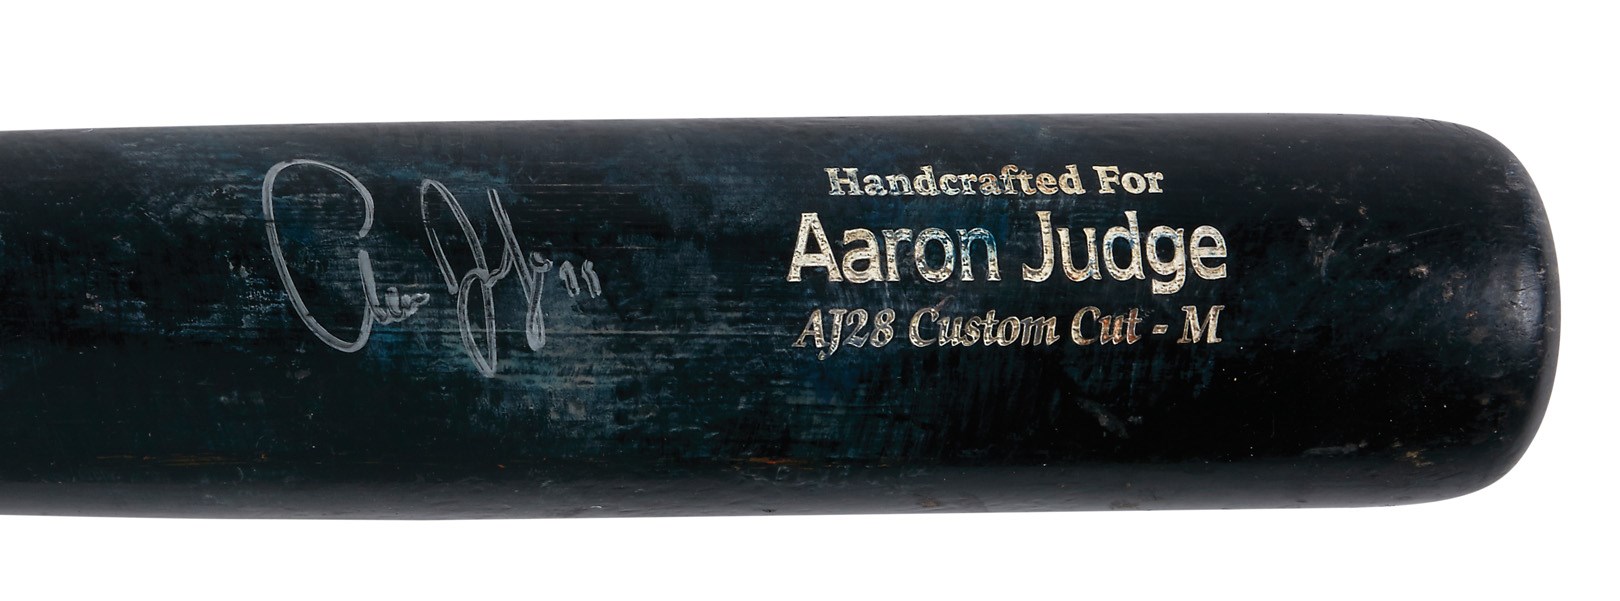 NY Yankees, Giants & Mets - 2016 Aaron Judge Signed Game Used Bat (PSA GU 10, Photo-Matched)